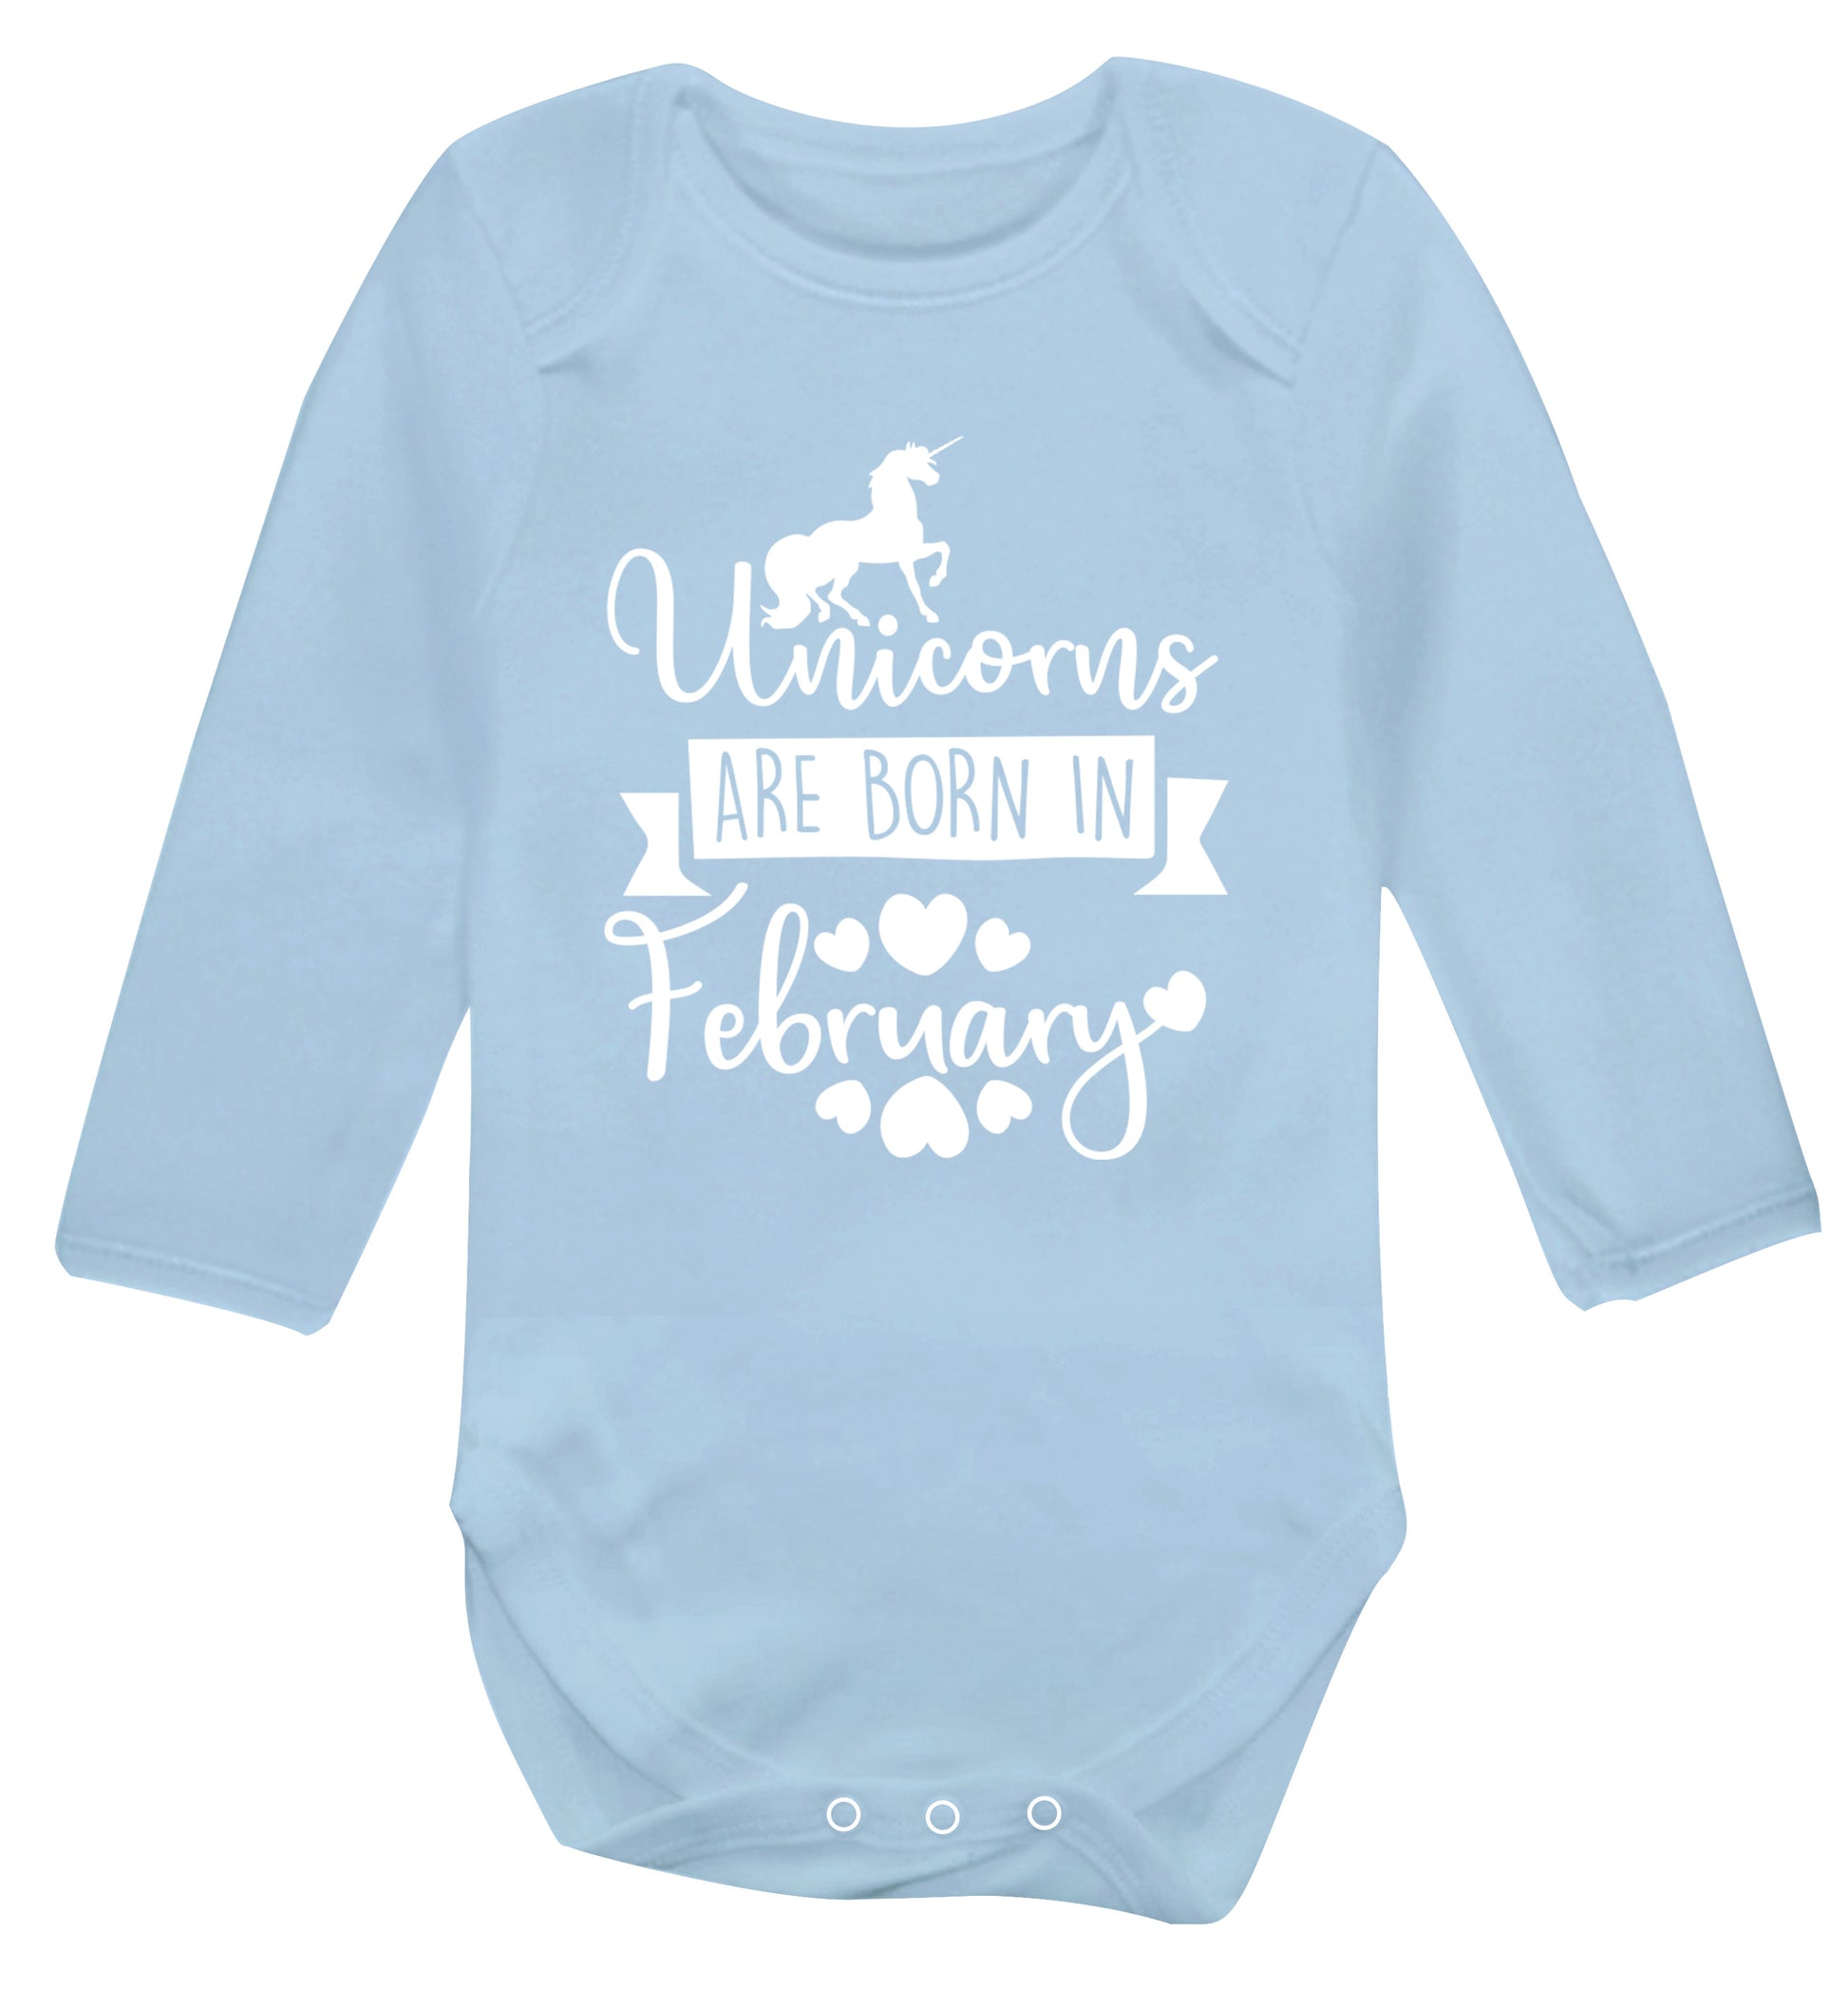 Unicorns are born in February Baby Vest long sleeved pale blue 6-12 months